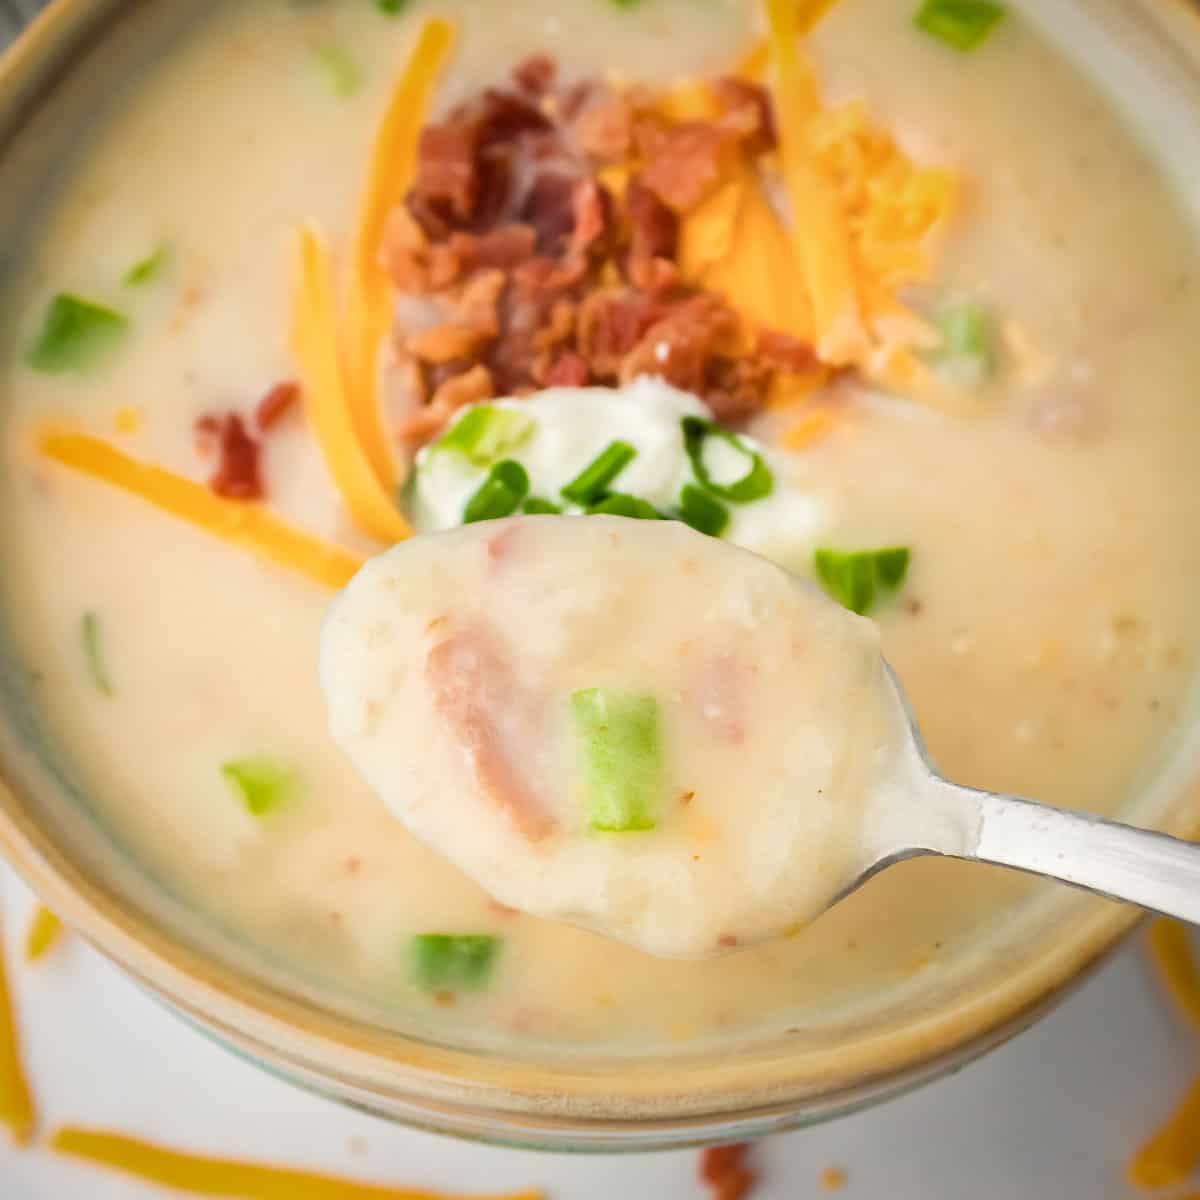 Overhead shot of a spoon holding some potato soup garnished with bacon, cheese, and chives in a green bowl.